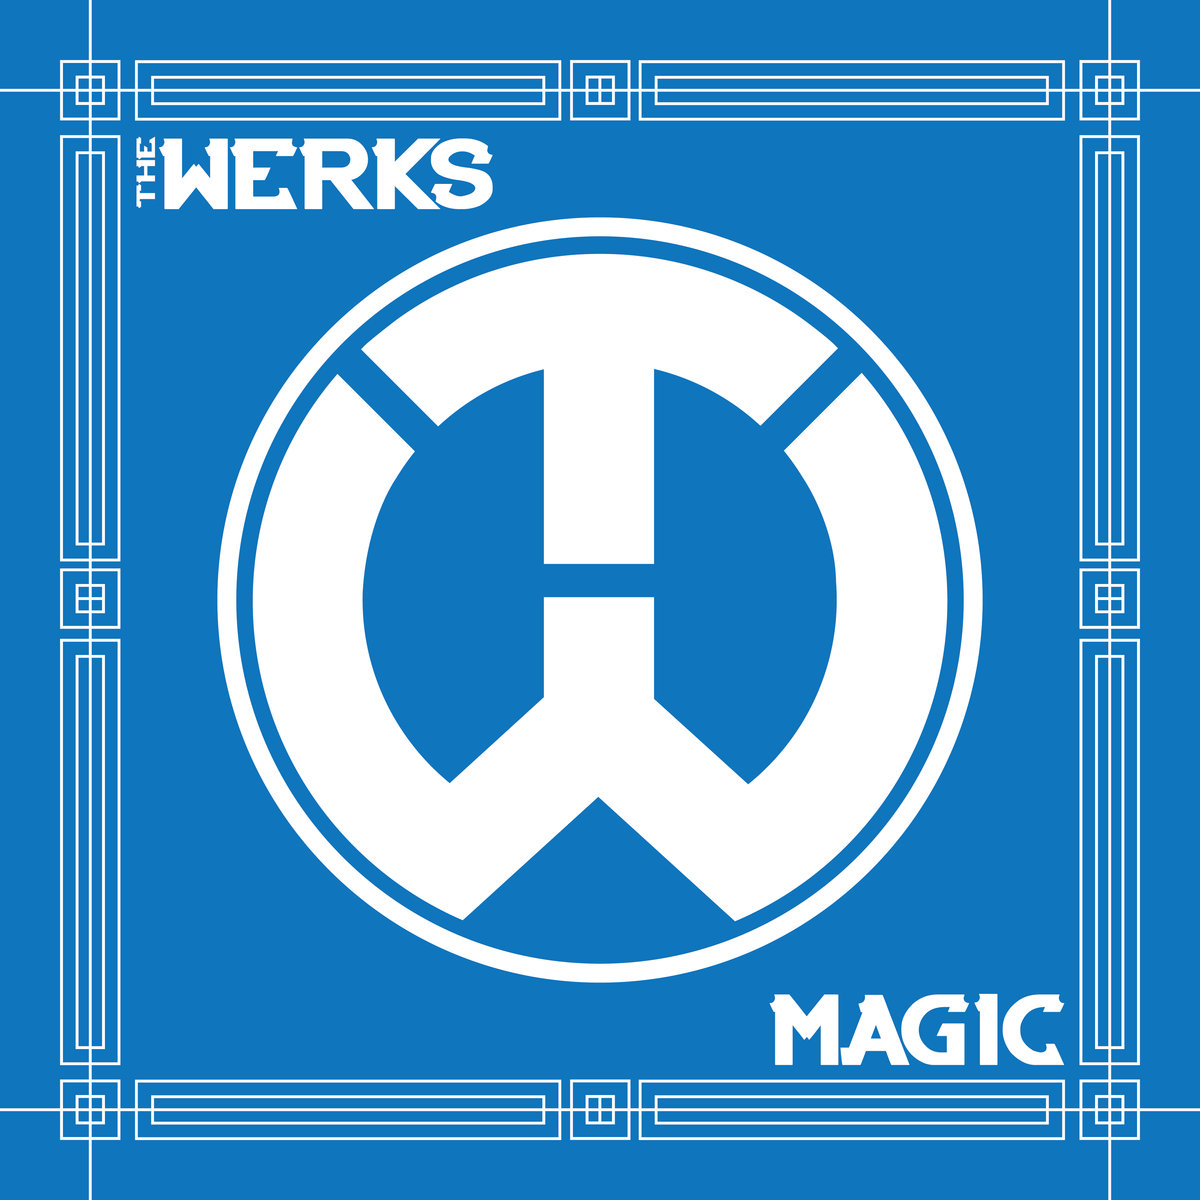 The Werks album cover artwork for Magic. Photo by: The Werks / Twitter